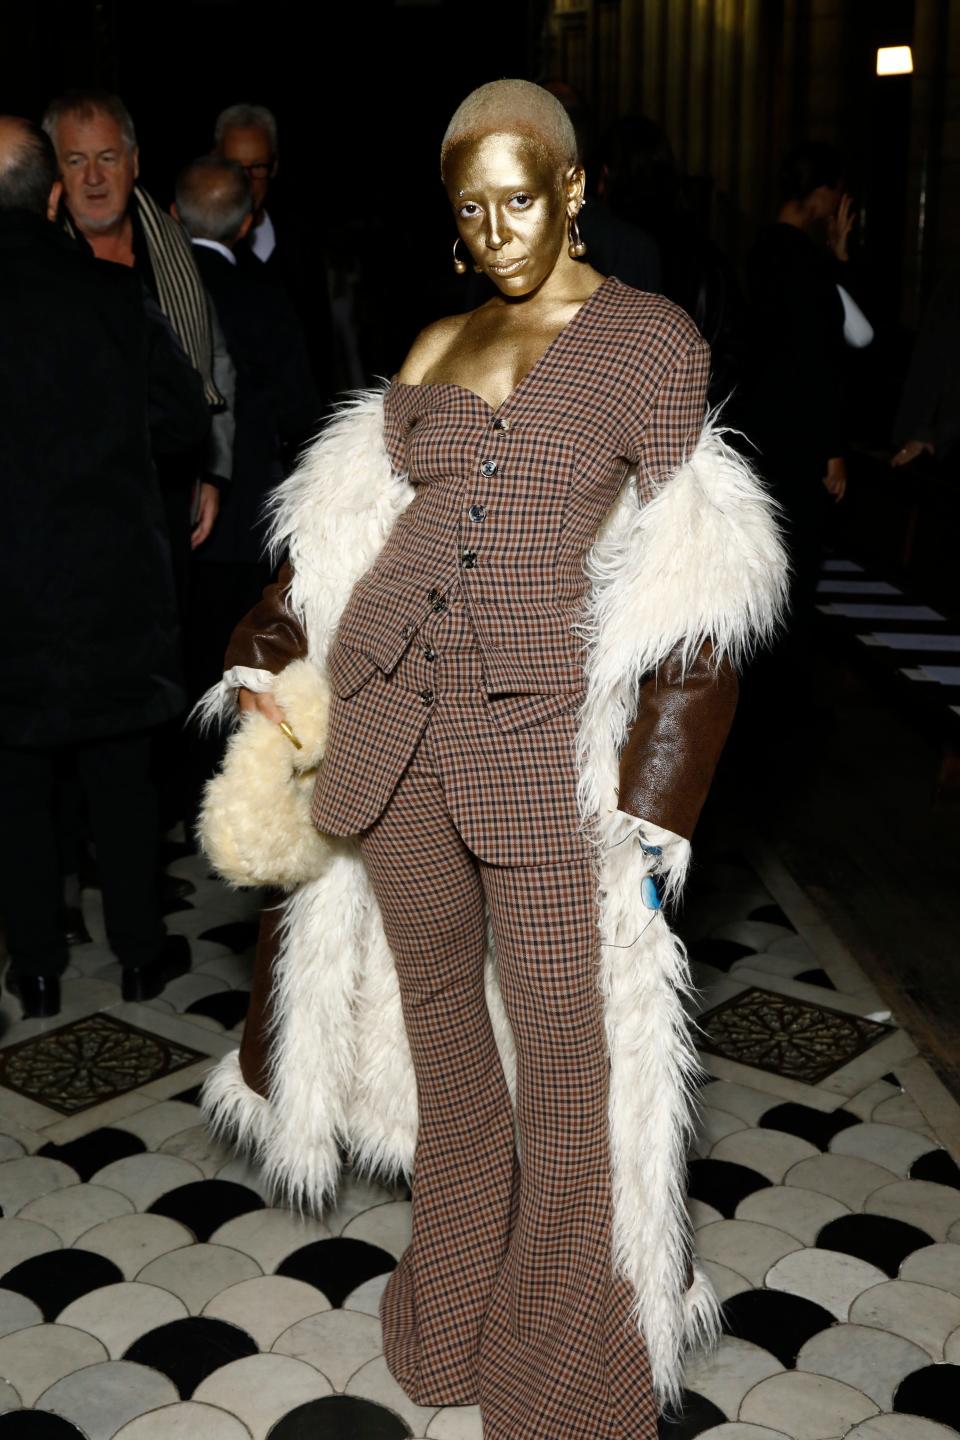 Doja Cat attends the A.W.A.K.E Mode Womenswear Spring/Summer 2023 at Paris Fashion Week on October 4, 2022.